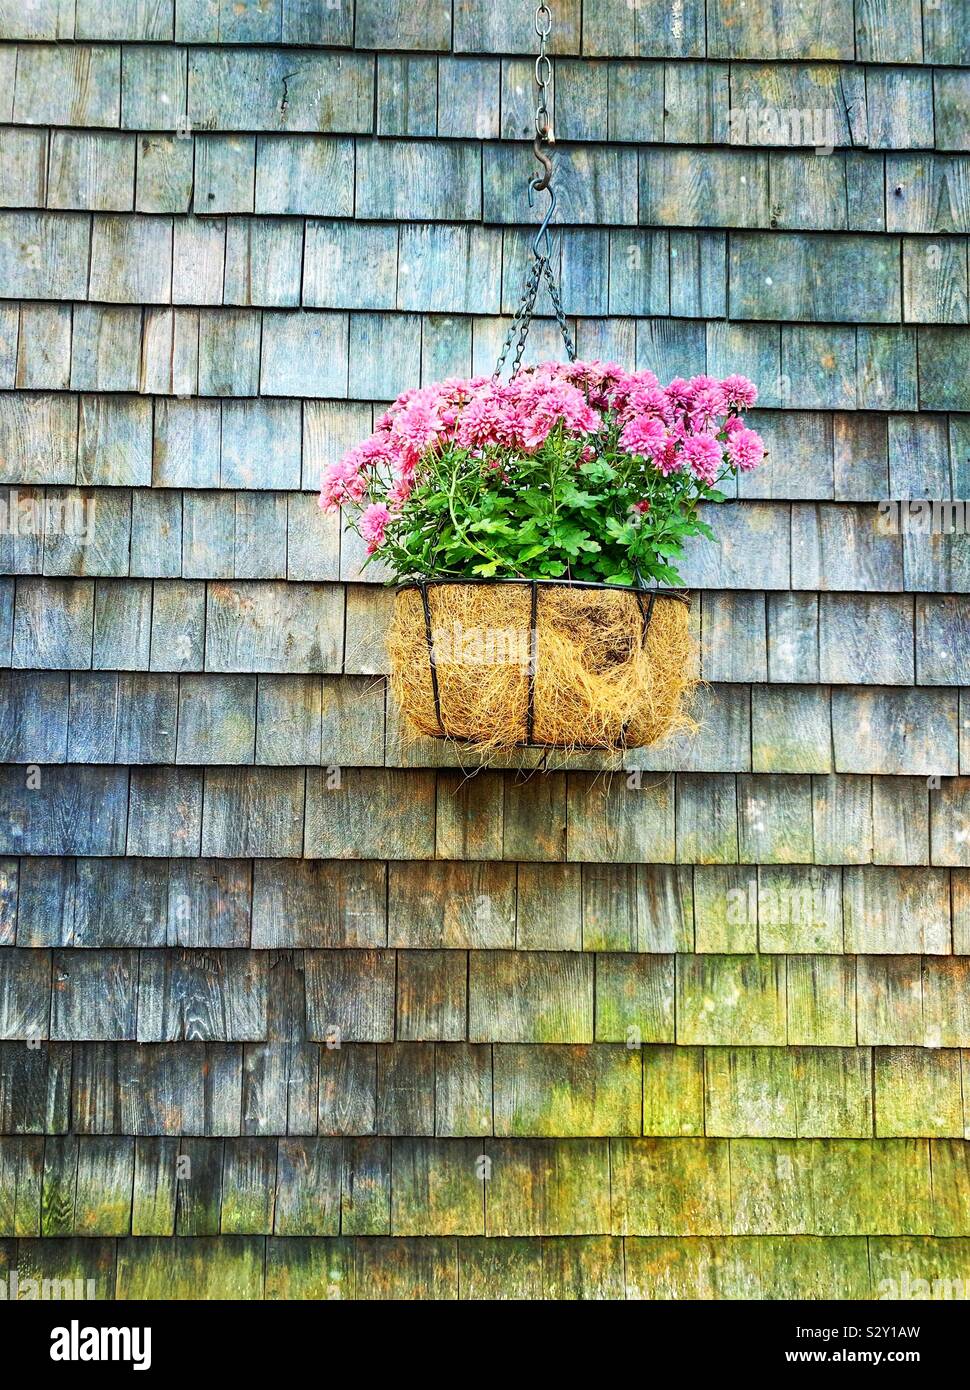 Hanging basket of autumn chrysanthemum flowers against an aged wood shingle wall. Stock Photo